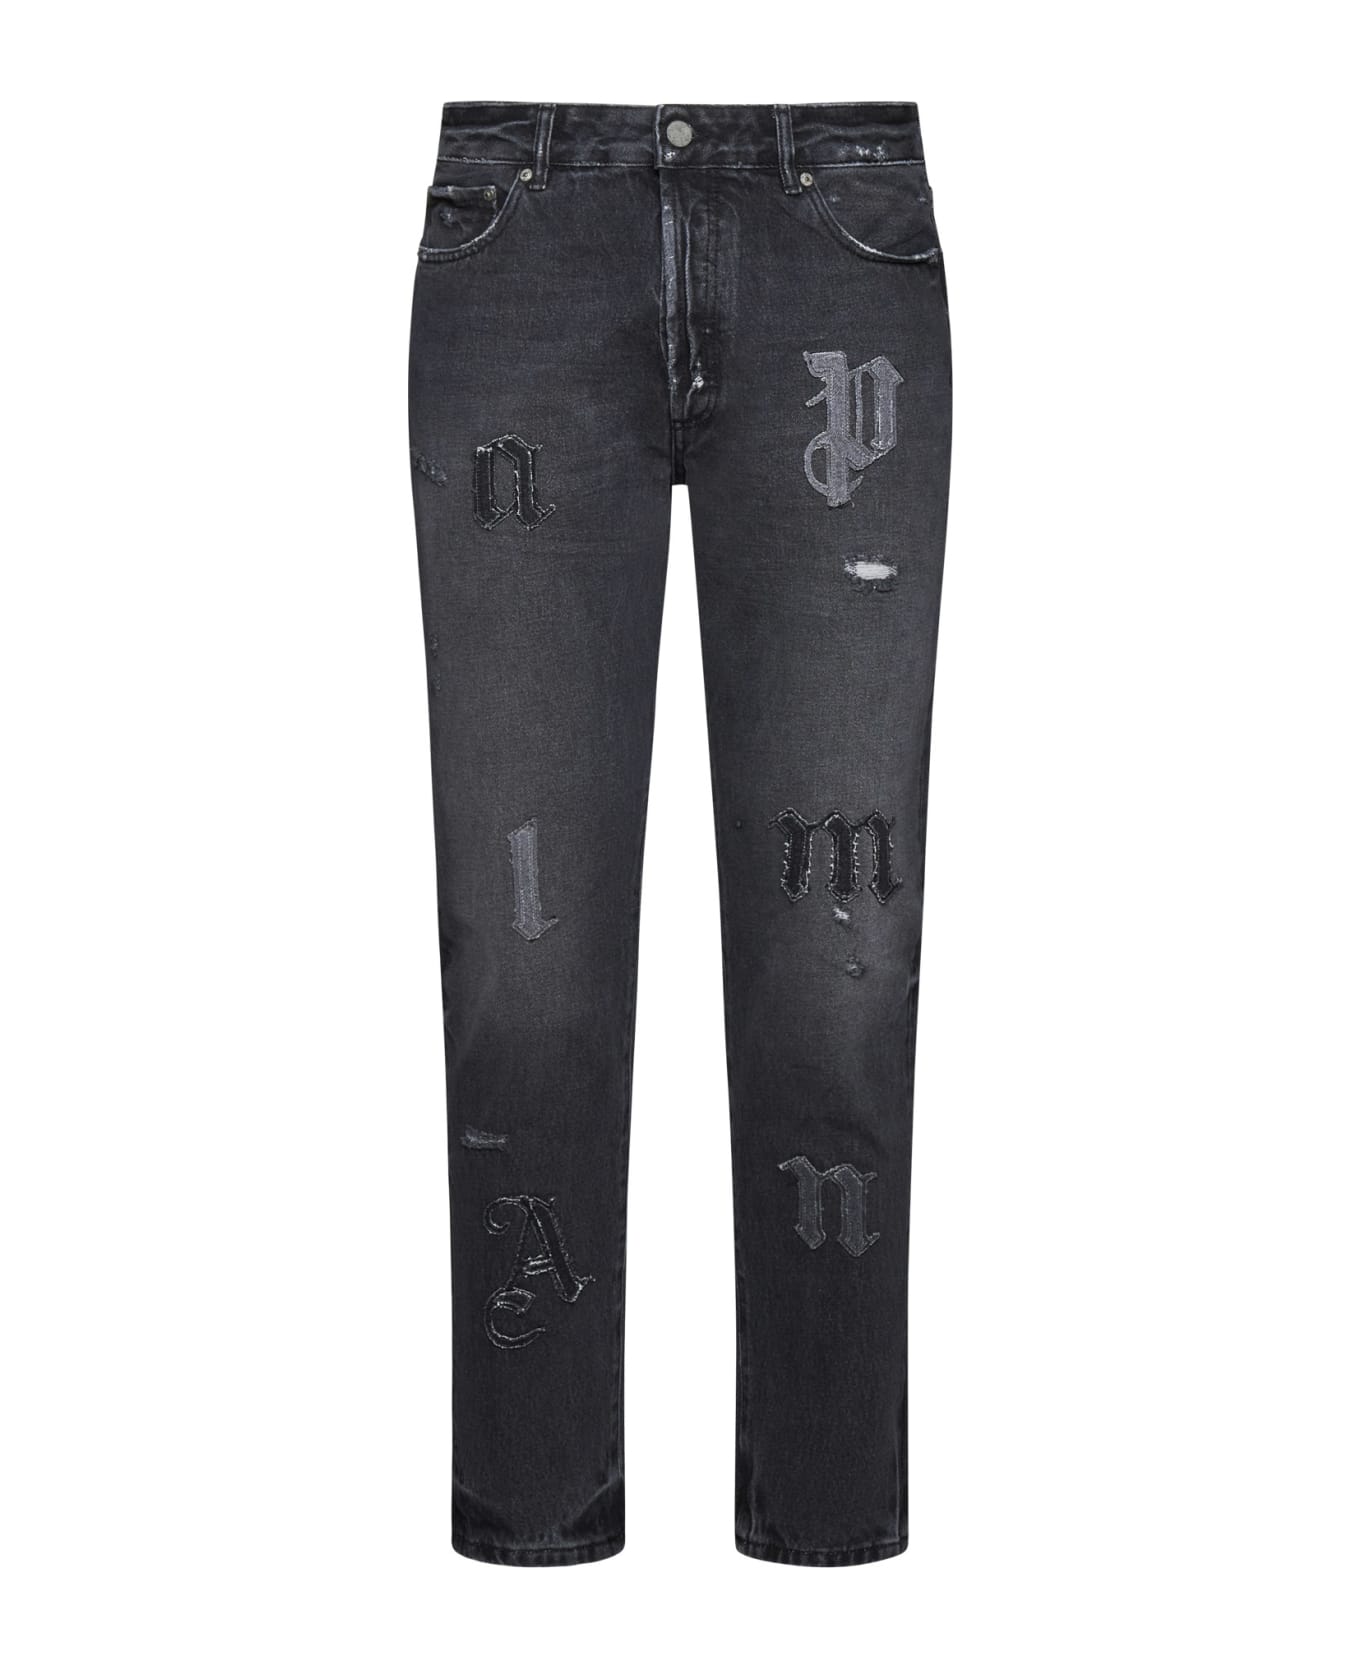 Palm Angels Jeans With Logoed Patches - Black vlack デニム